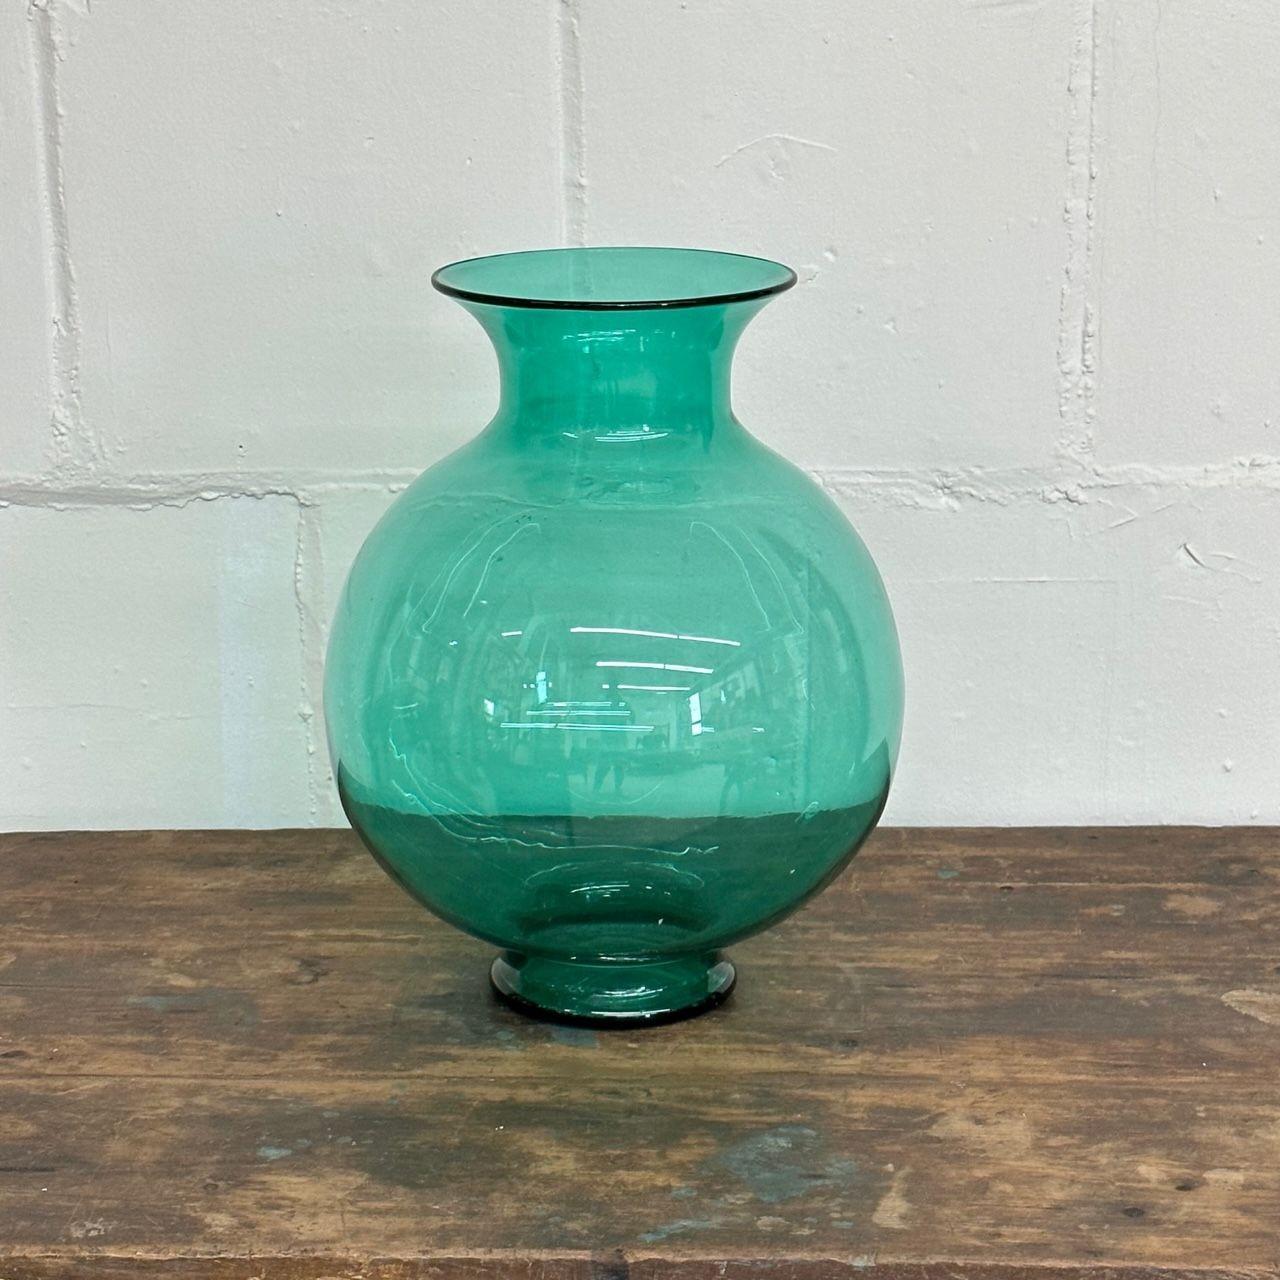 Blown Glass Large Mid-Century Modern Handblown Glass Turquoise Table Vase / Vessel by Blenko For Sale